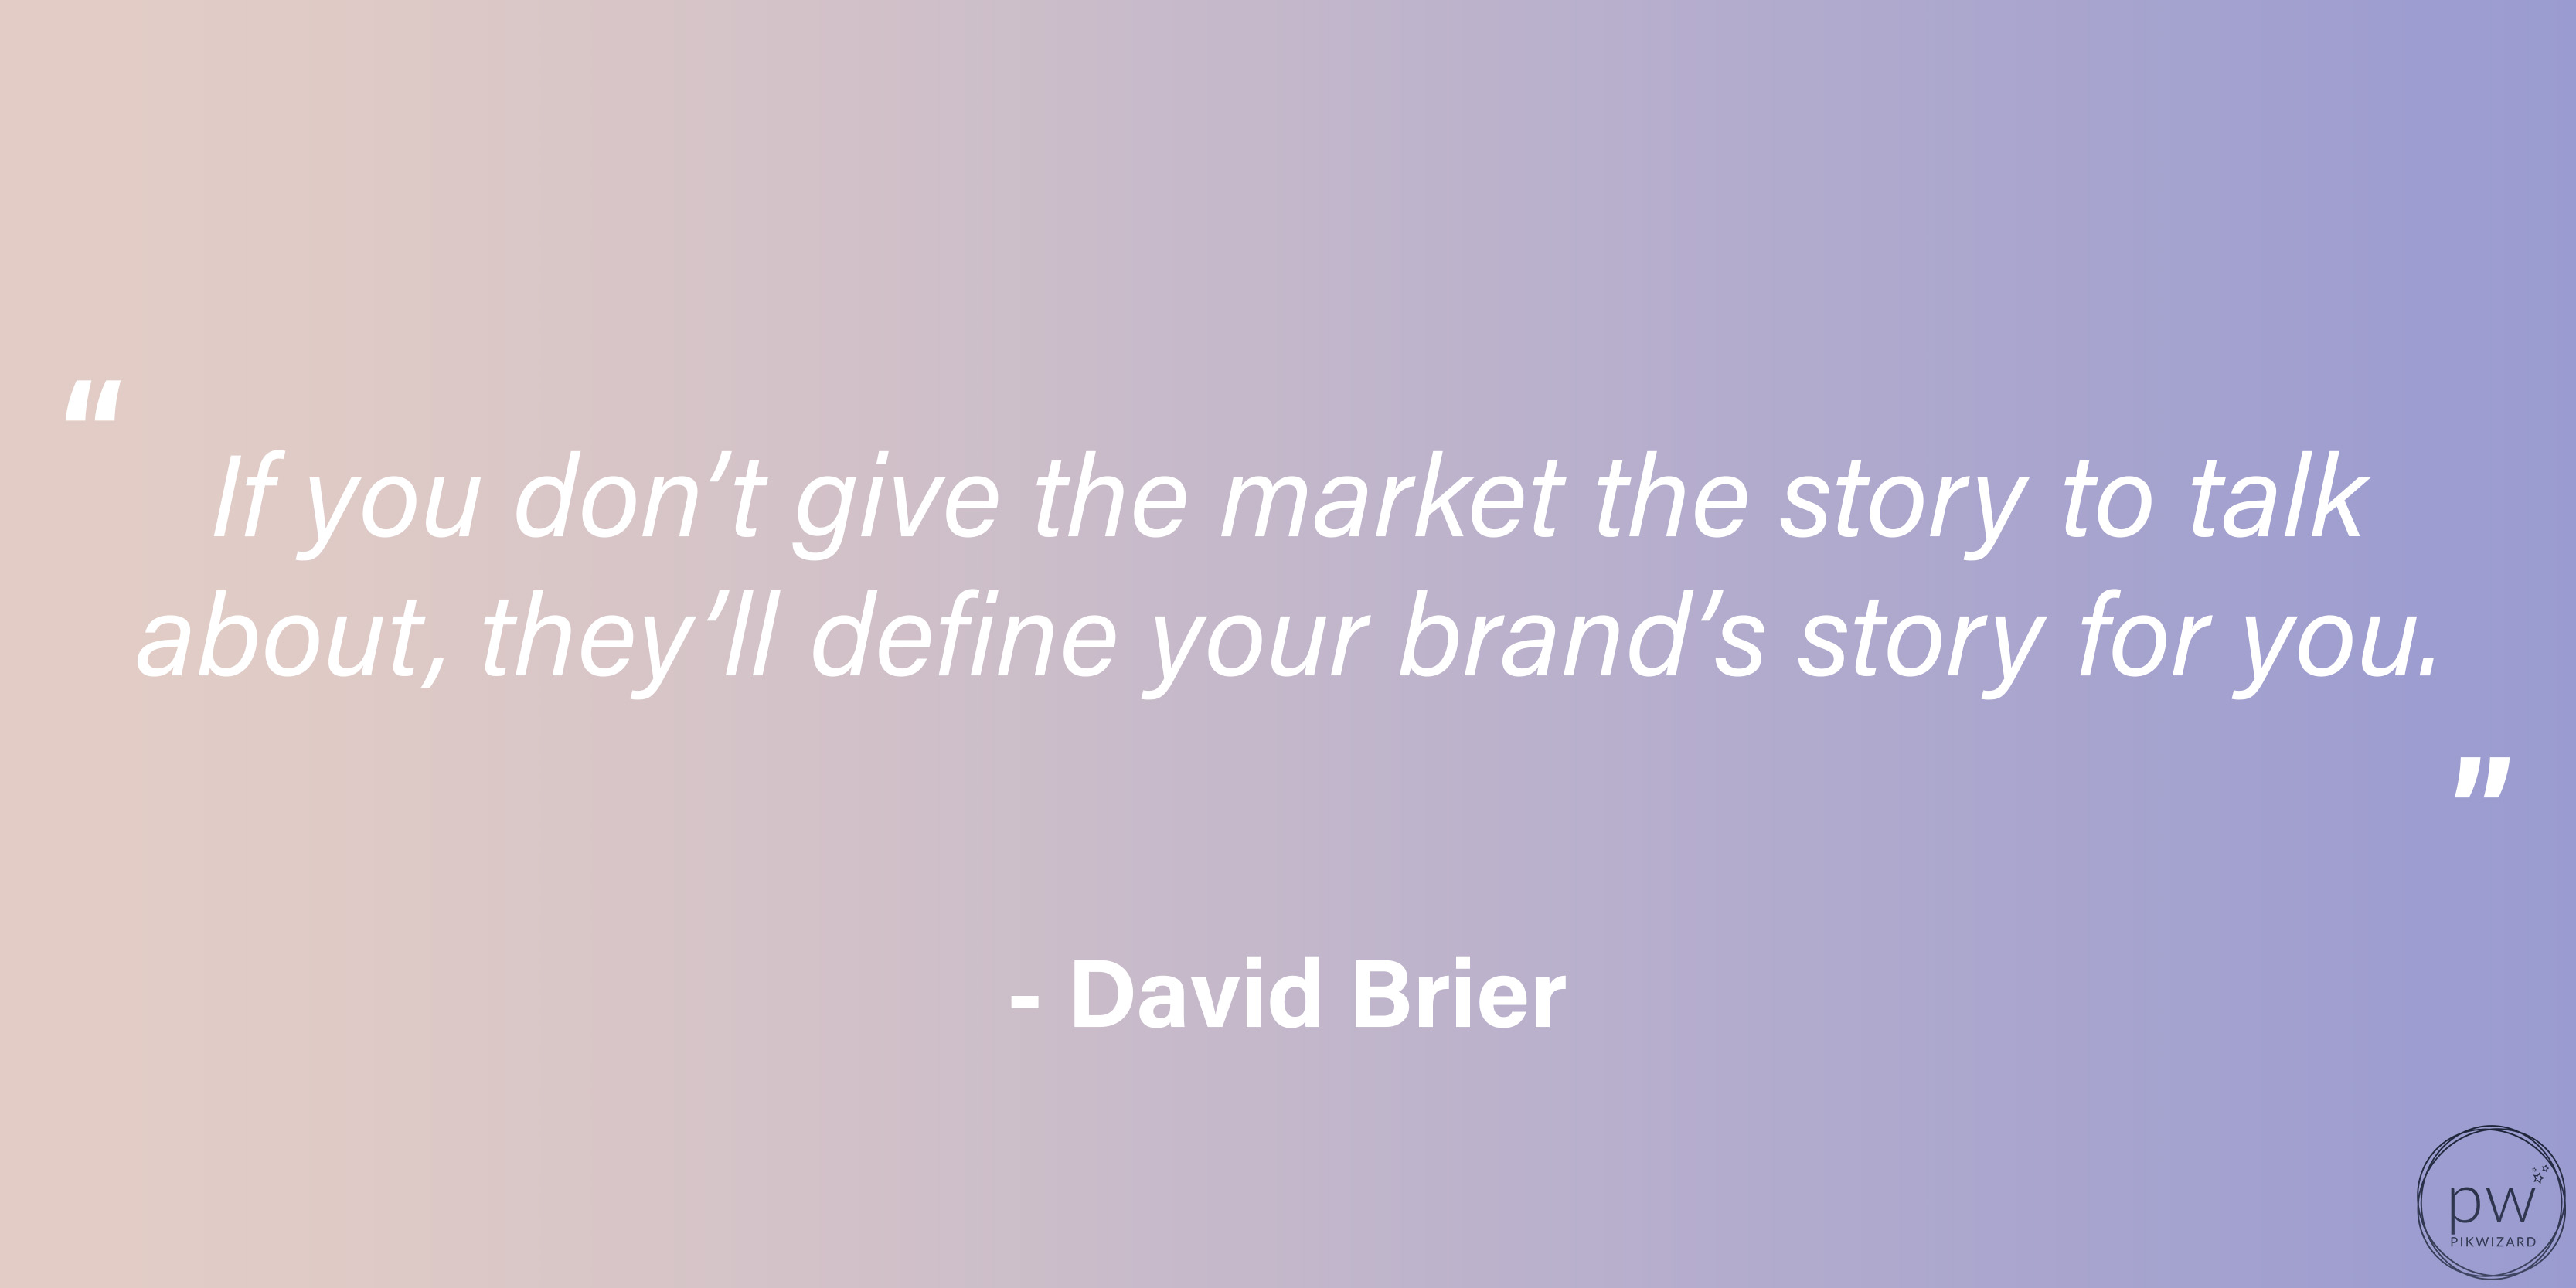 David Brier quote on a purple and pink gradient background - Tips on how to create an impactful brand story - Image